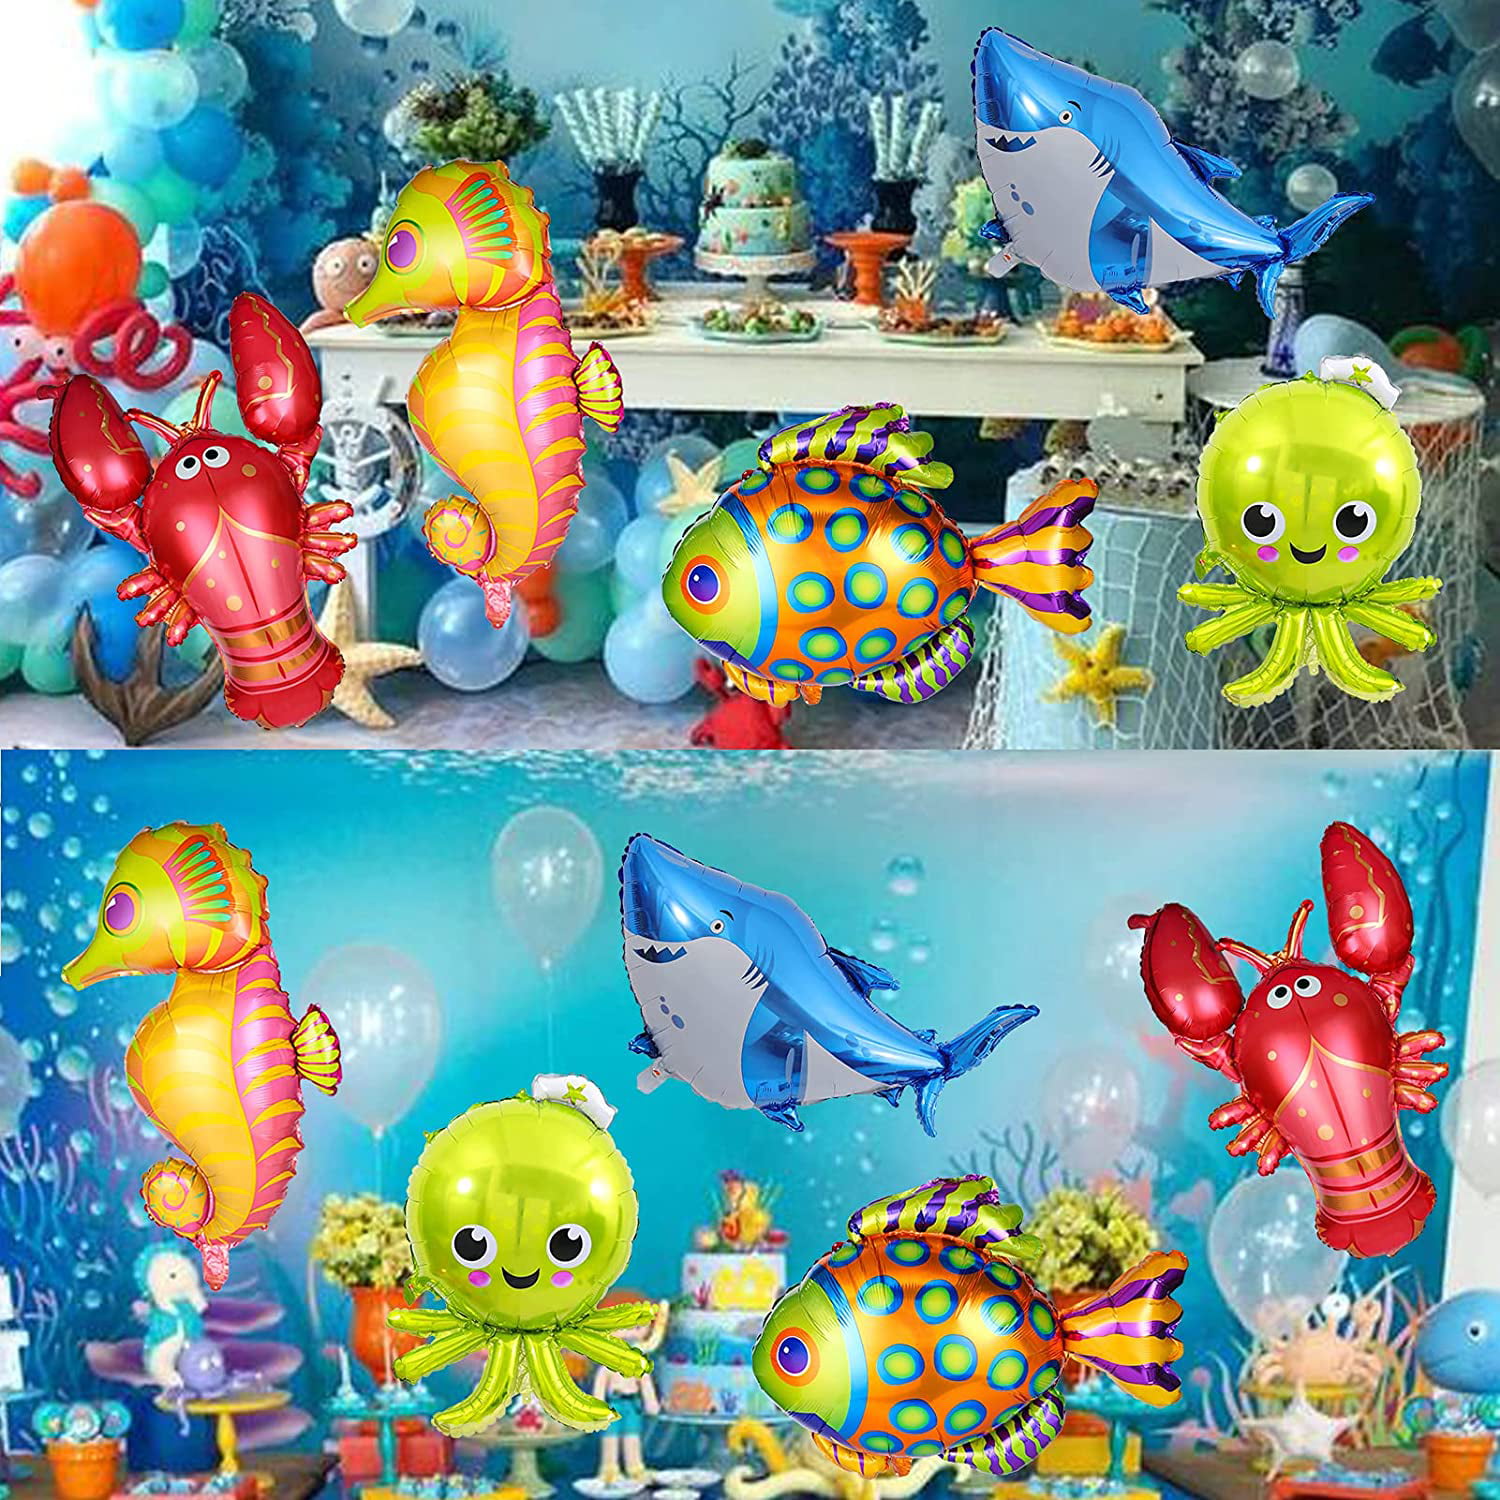 Ocean Themed Cartoon Balloon Fish Balloon For Boys And Girls Perfect For  Birthday Parties, Baby Showers, And Decorations HKD230808 From  Look_for_mee, $2.14